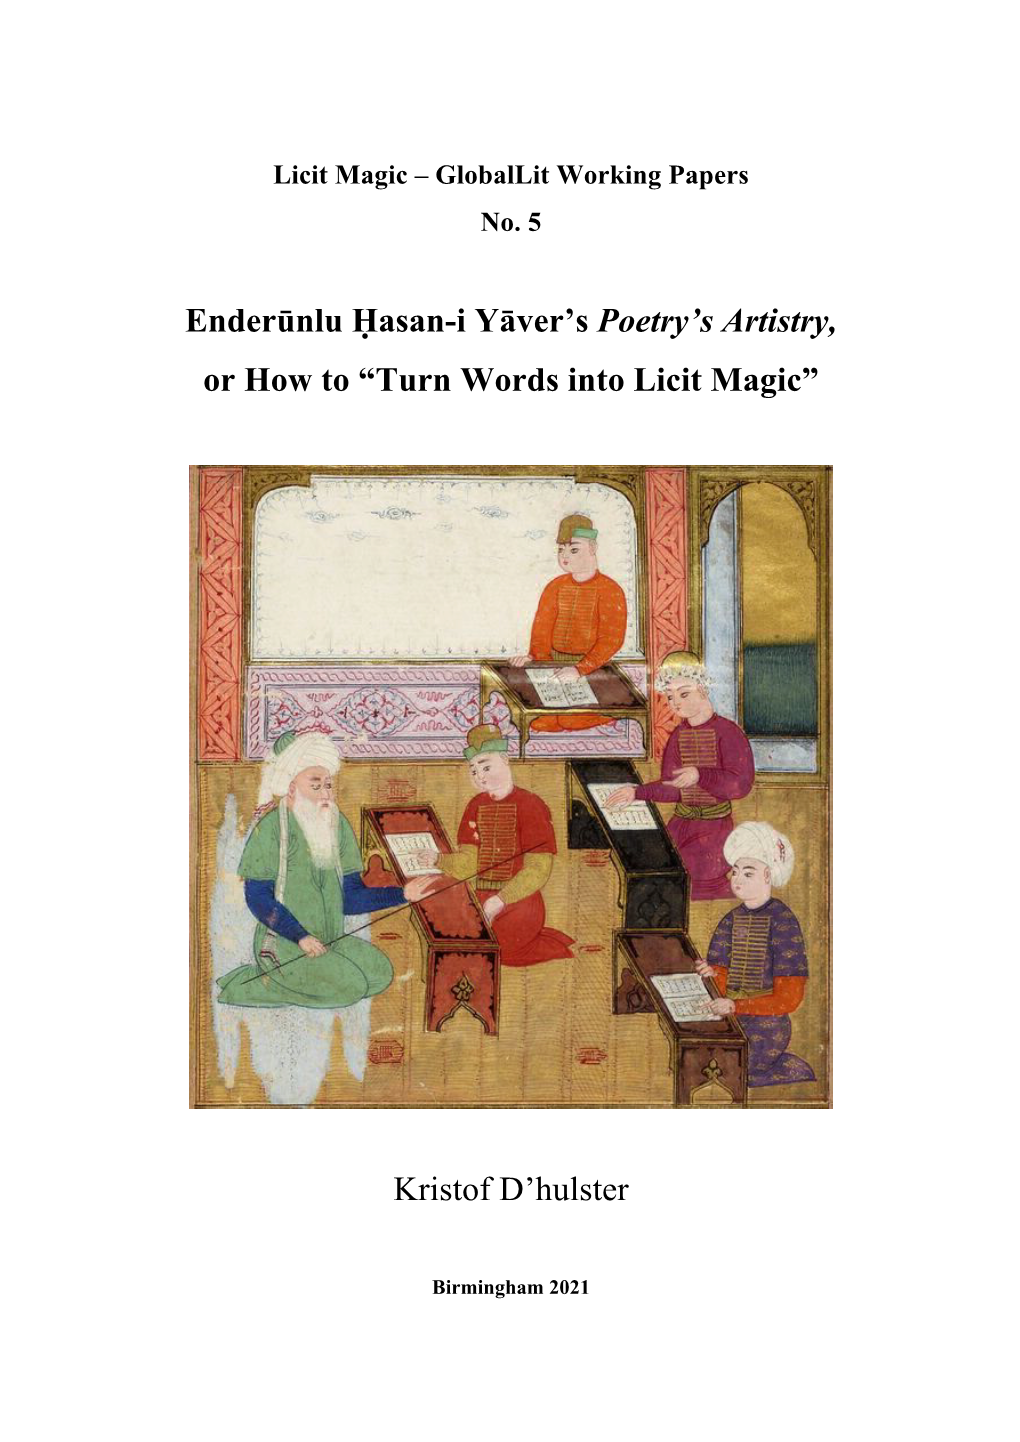 Enderūnlu Ḥasan-I Yāver's Poetry's Artistry, Or How to “Turn Words Into Licit Magic” Kristof D'hulster